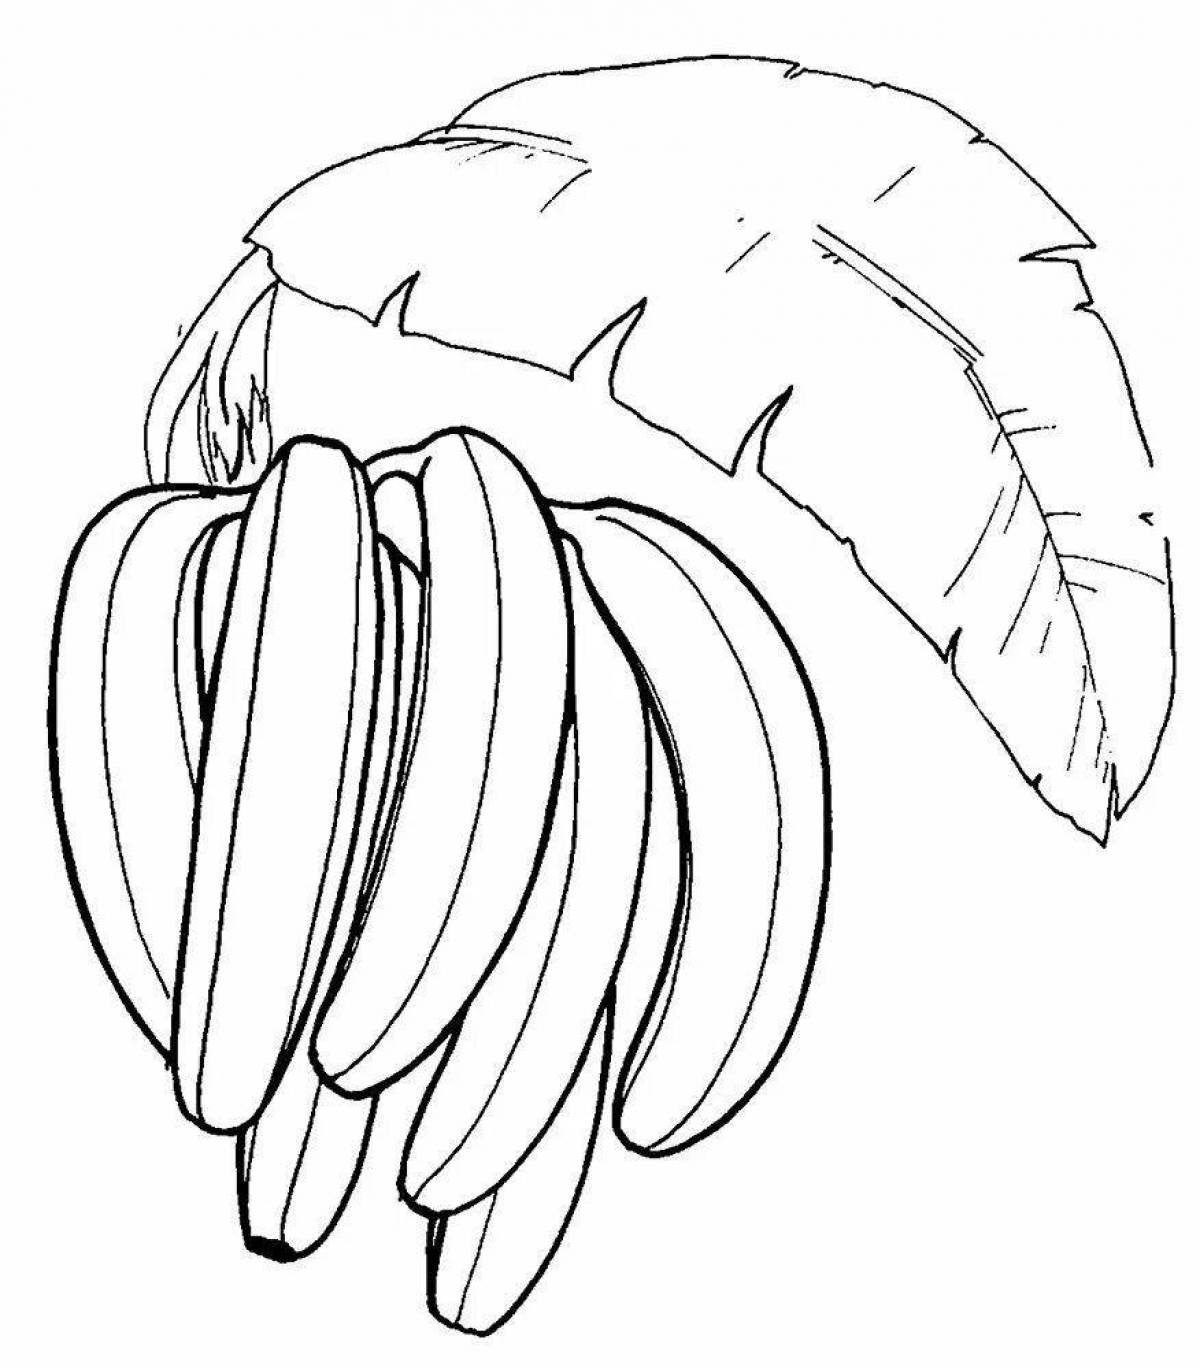 A fun banana coloring book for 2-3 year olds